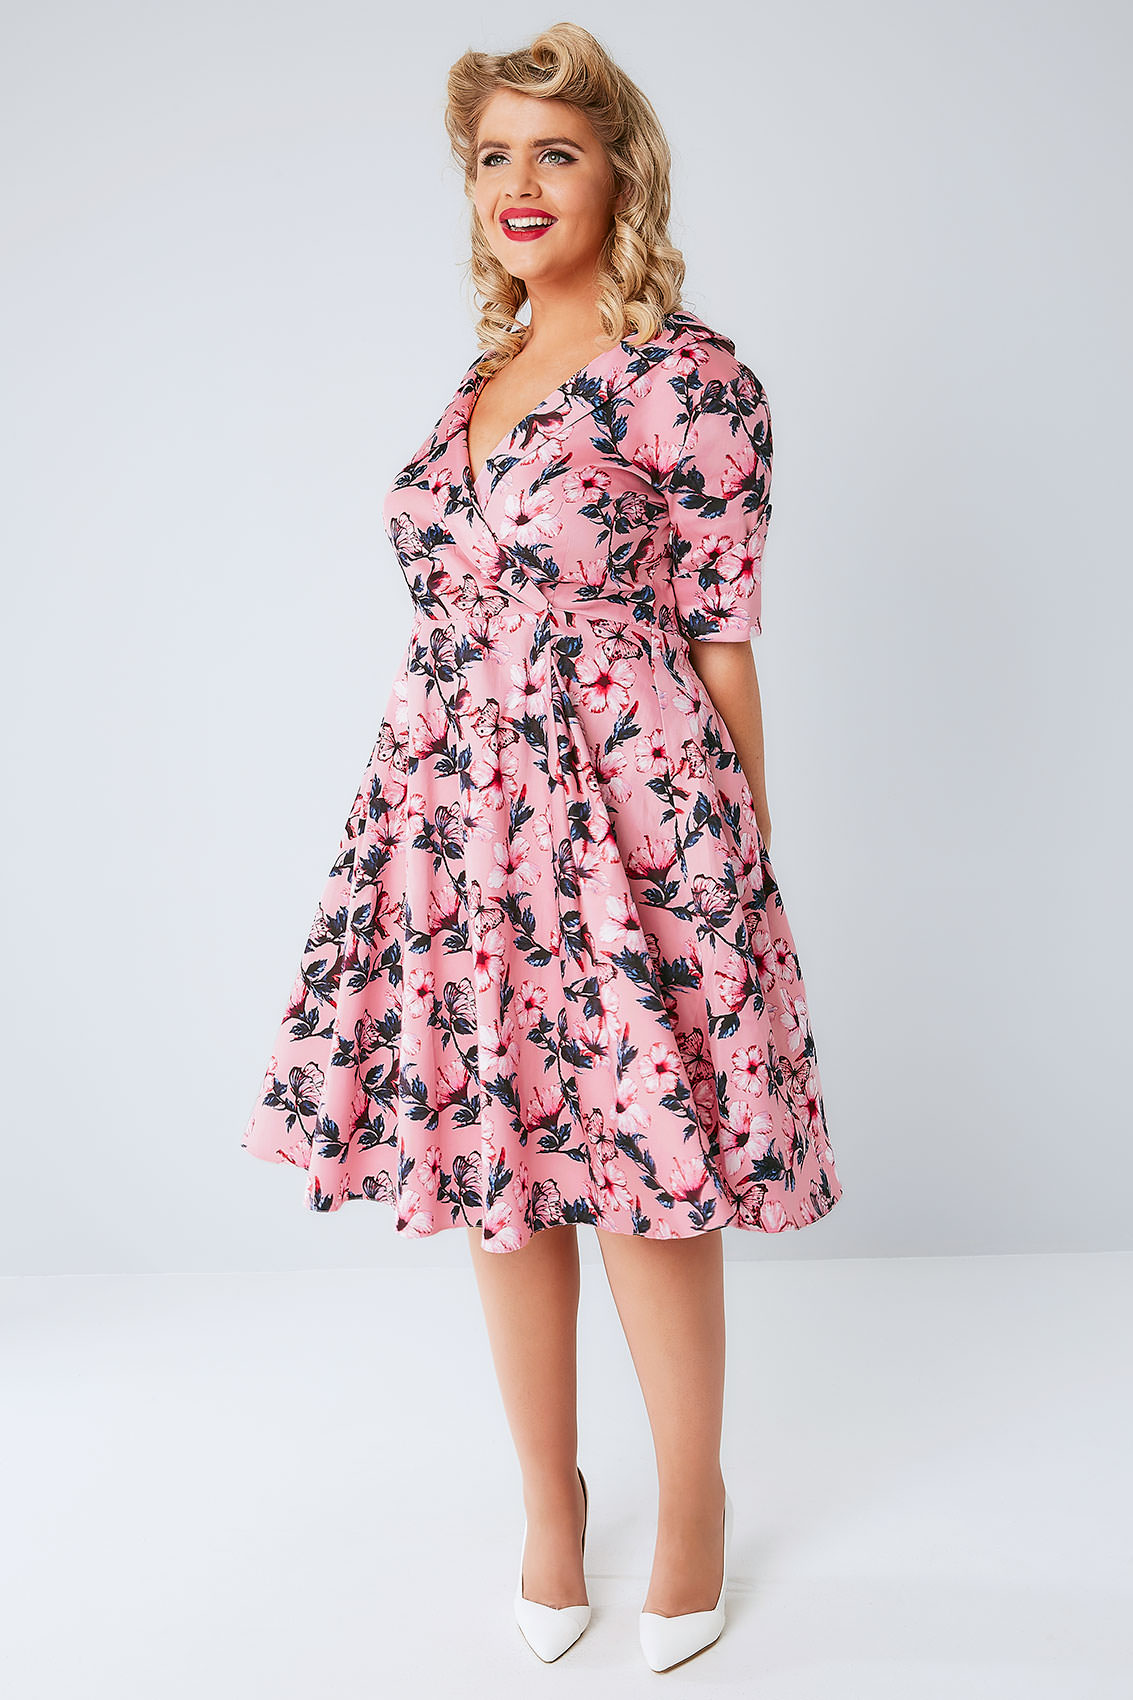 LADY VOLUPTUOUS Pink Butterfly Print Roxy Dress, Plus size 16 to 32